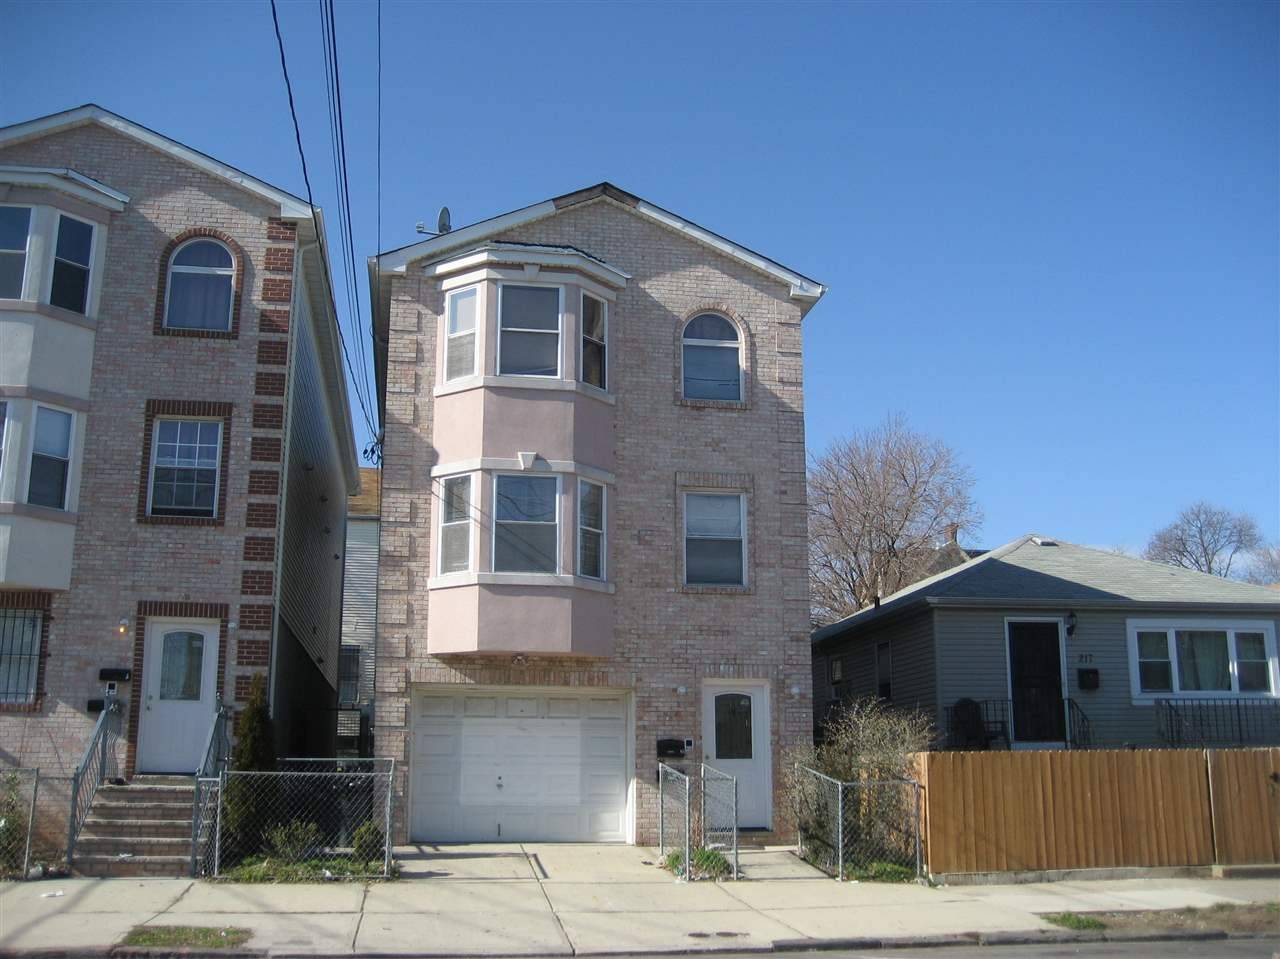 YOUNG TWO FAMILY HOME 6 OVER 6 ROOMS - Multi-Family Bergen Lafayette New Jersey